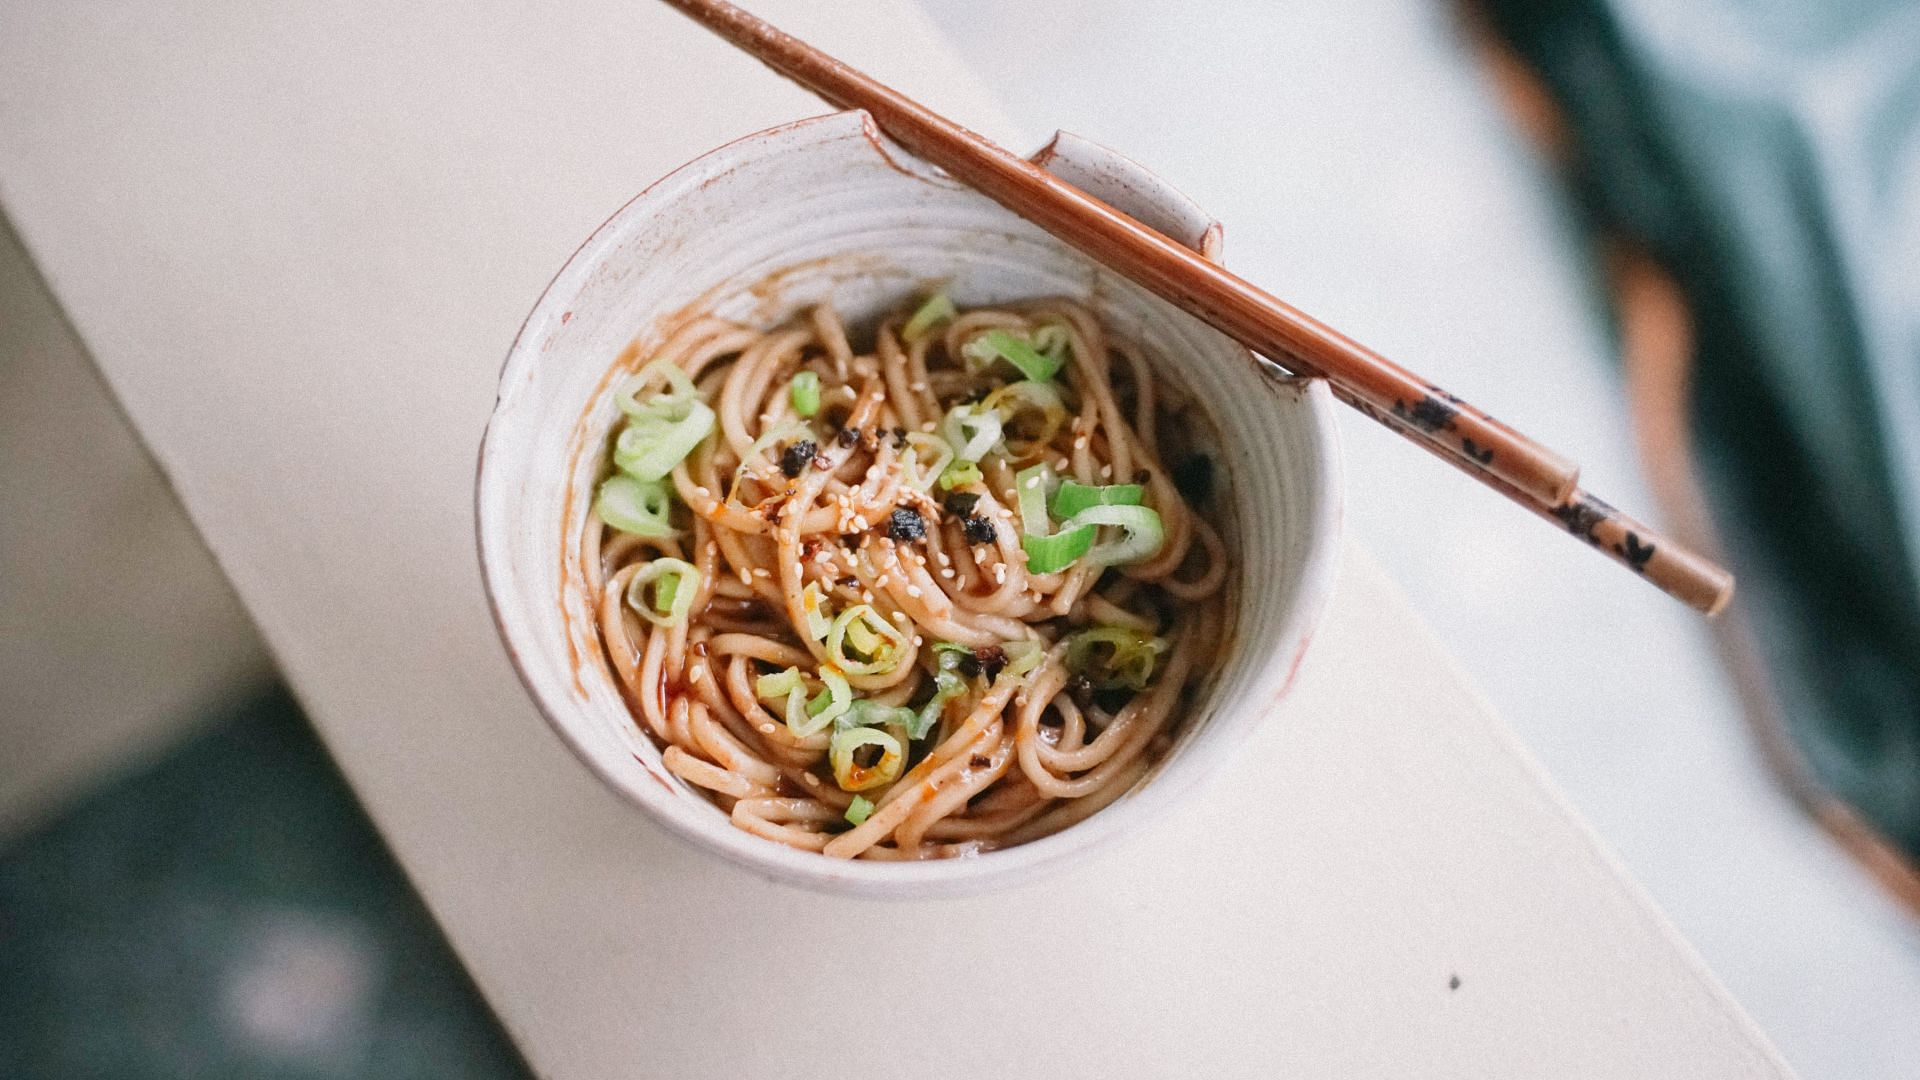 These japanese noodles are best served in hot broth. (Image via Unsplash / Laura Limsenkhe)